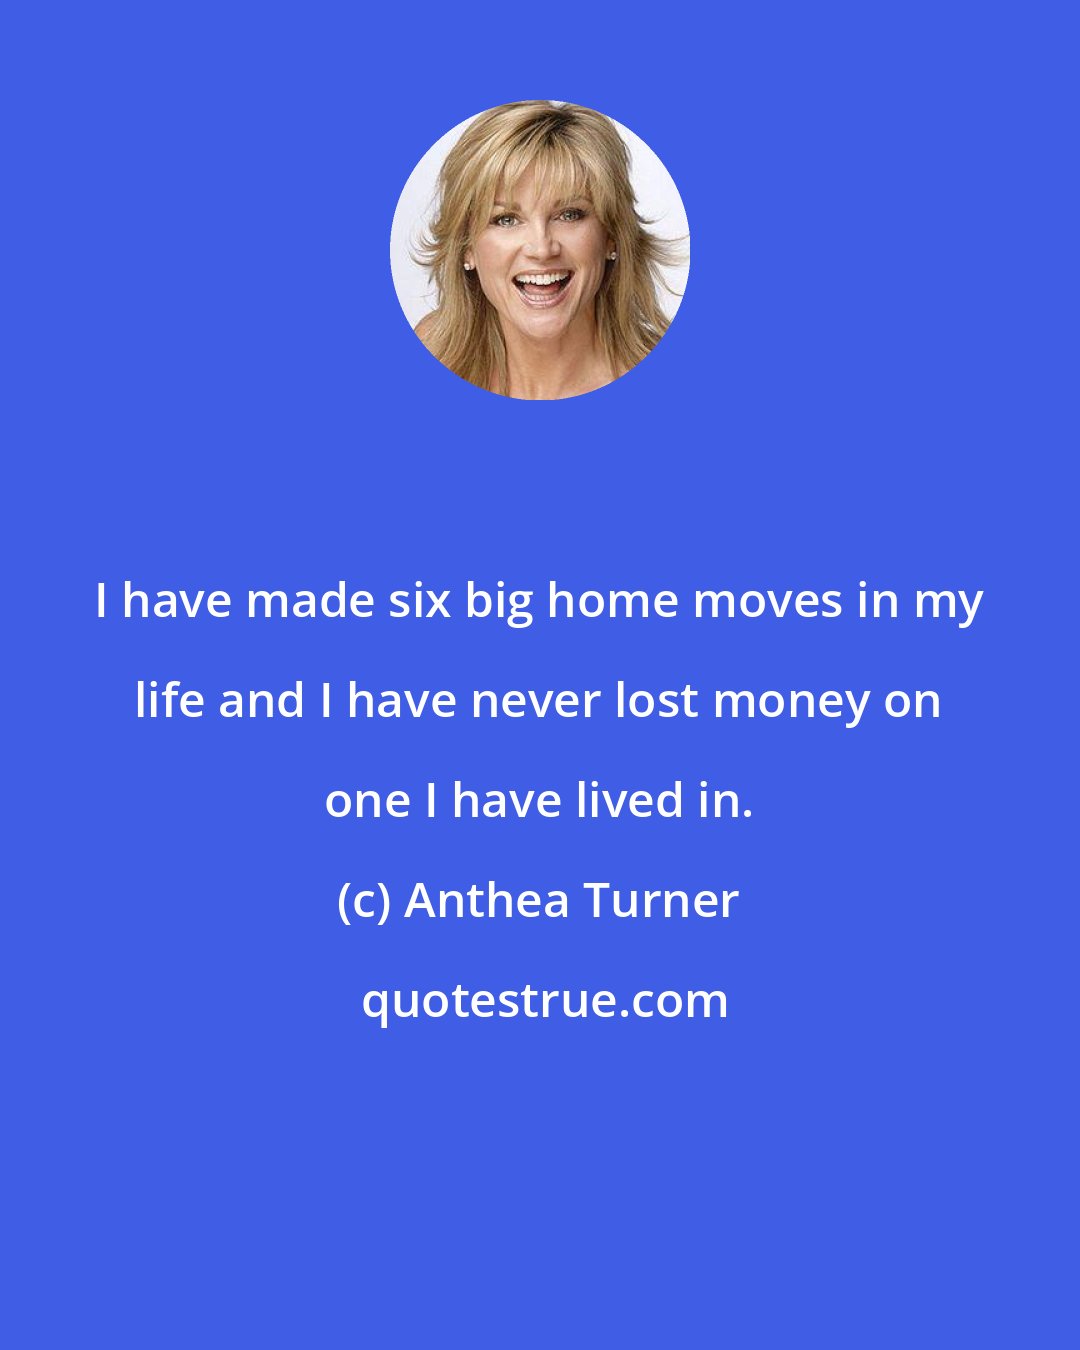 Anthea Turner: I have made six big home moves in my life and I have never lost money on one I have lived in.